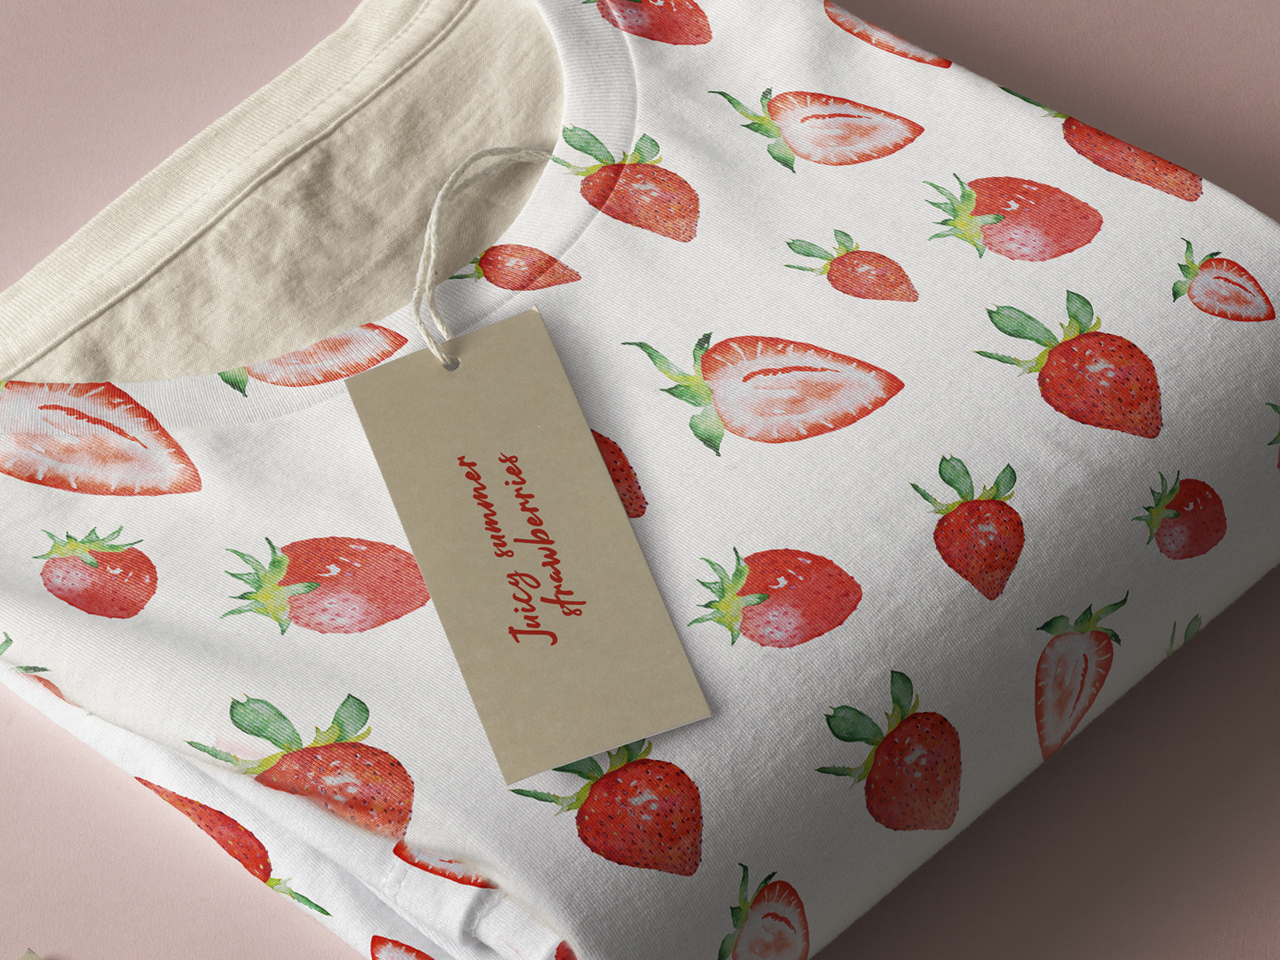 Watercolor strawberry pattern by Anastasia on Dribbble